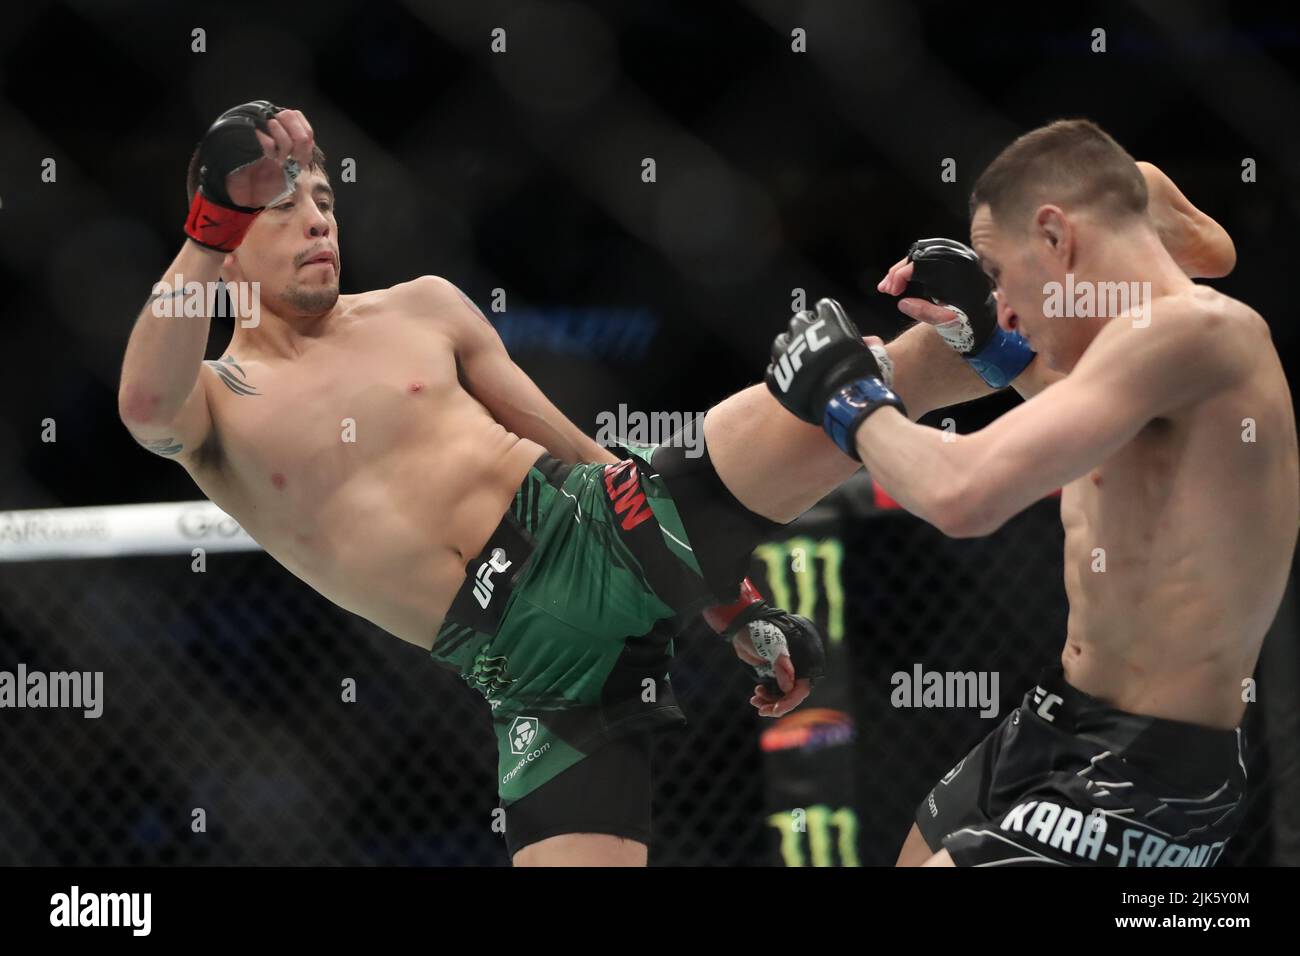 DALLAS, TX - JULY 30: (L-R) Brandon Moreno kicks Kai Kara-France in their Flyweight bout during the UFC 277 event at American Airlines Center on July 30, 2022, in Dallas, Texas, United States. (Photo by Alejandro Salazar/PxImages) Credit: Px Images/Alamy Live News Stock Photo